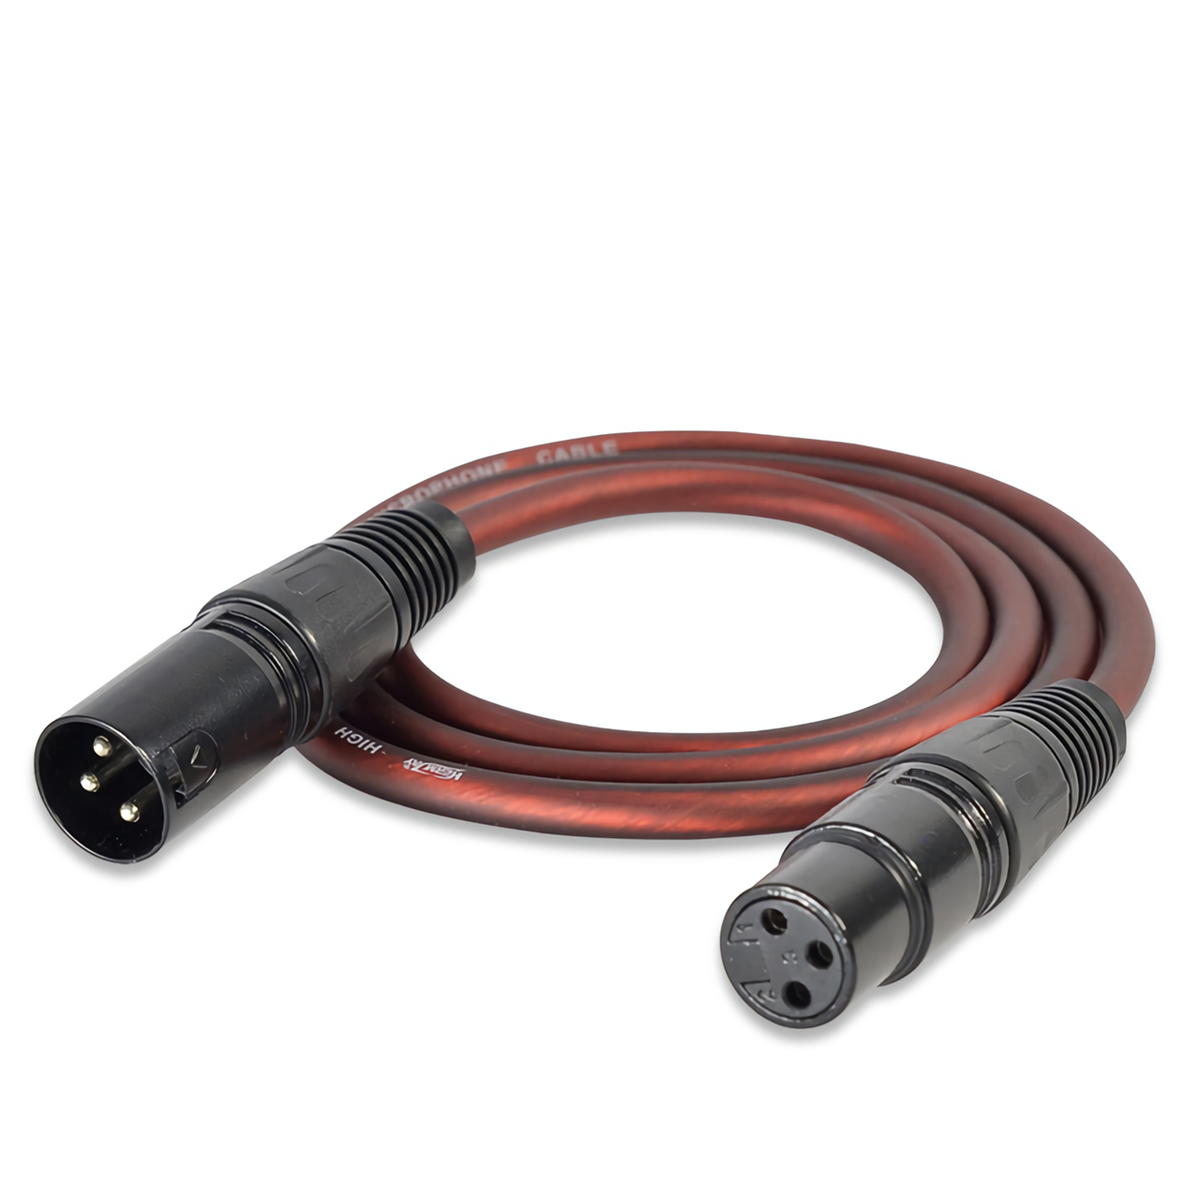 BAYNAST JQB-8805 3Pin XLR Male to XLR Female Microphone Cable Audio Extension Cables Cord for Speakers Microphone Amplifier Wire